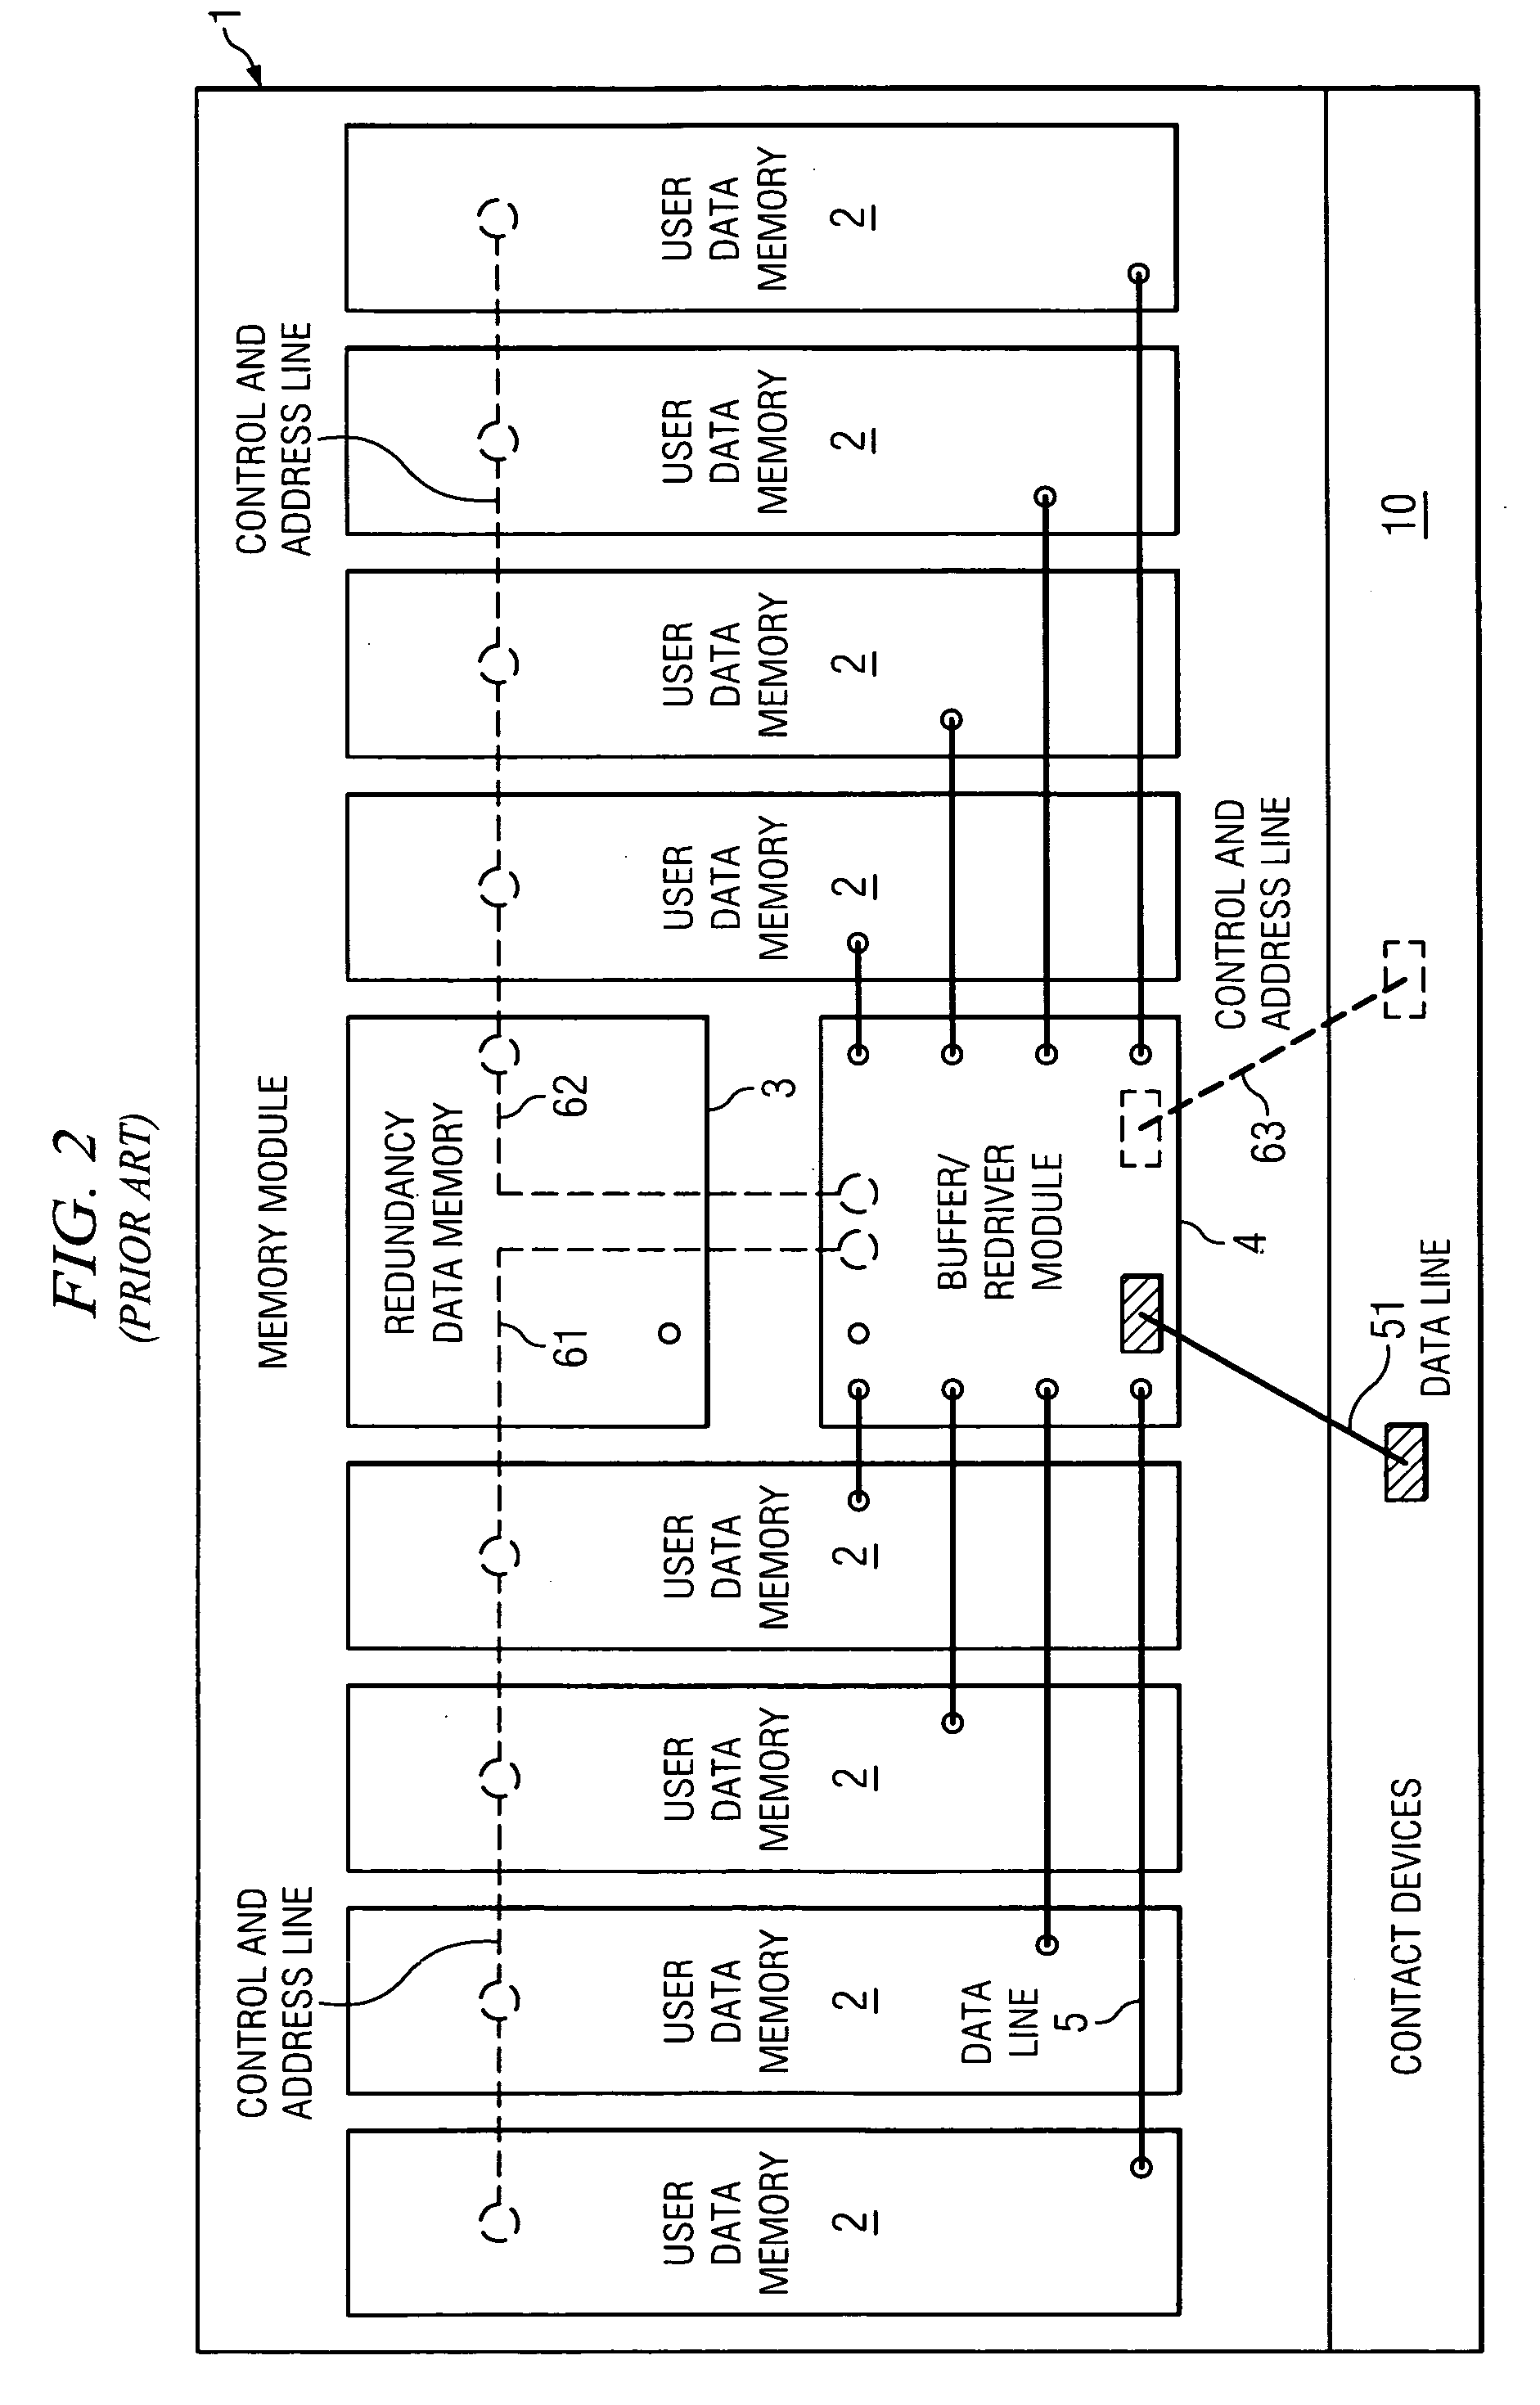 Memory module and method for operating a memory module in a data memory system